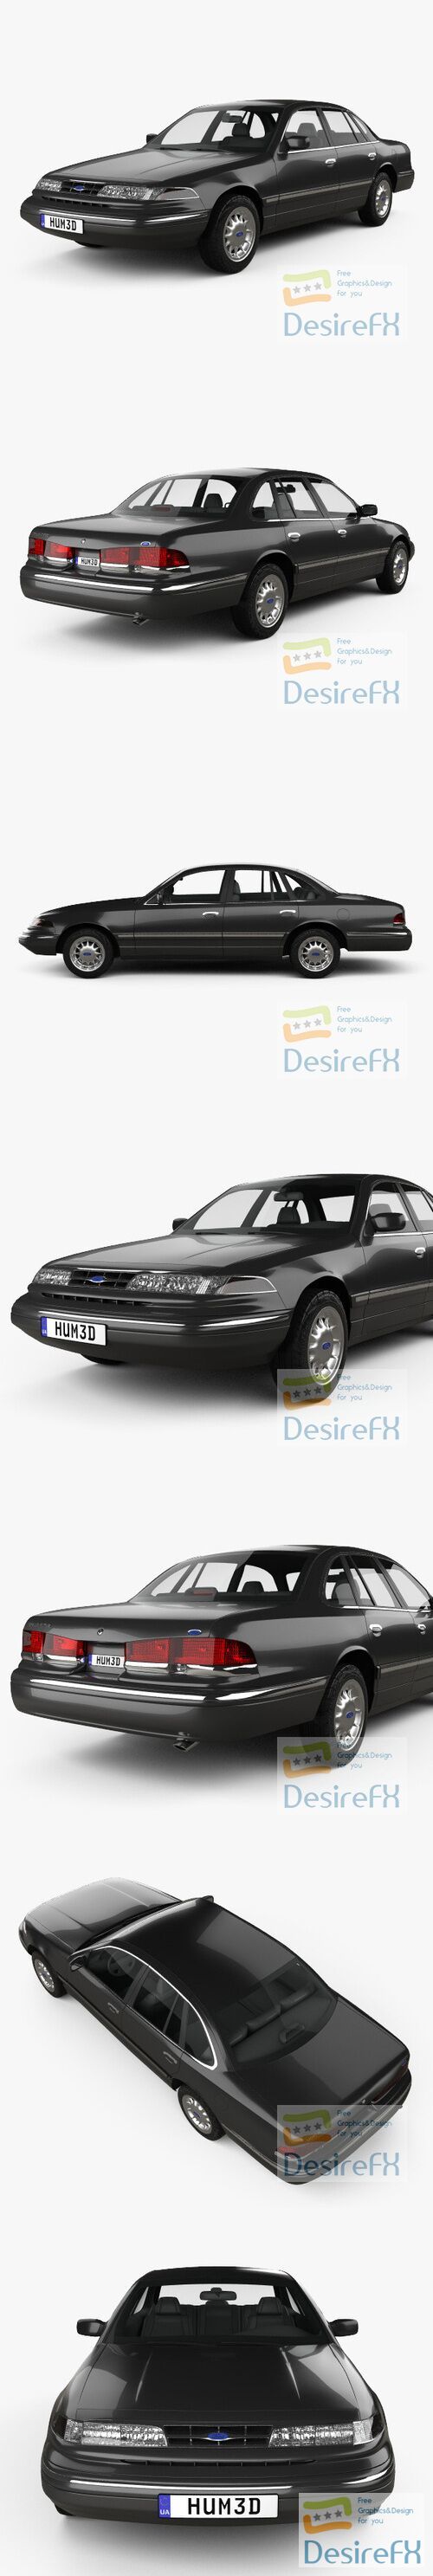 Ford Crown Victoria 1995 3D Model